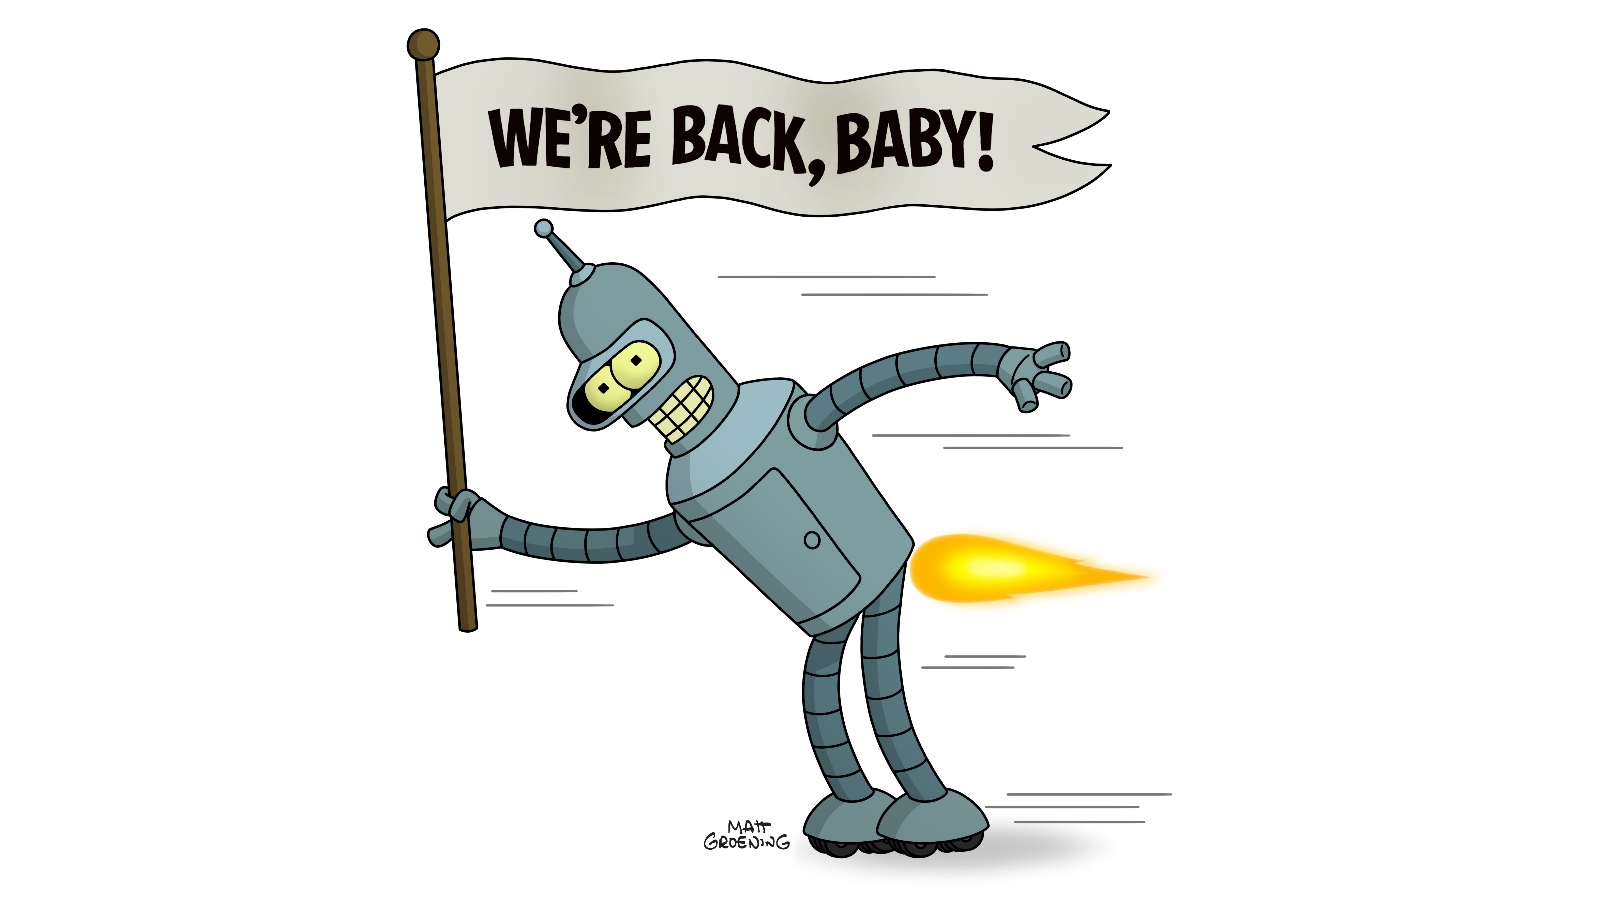 Bender the robot from futurama holds a pennant that reads "we're back, baby!"